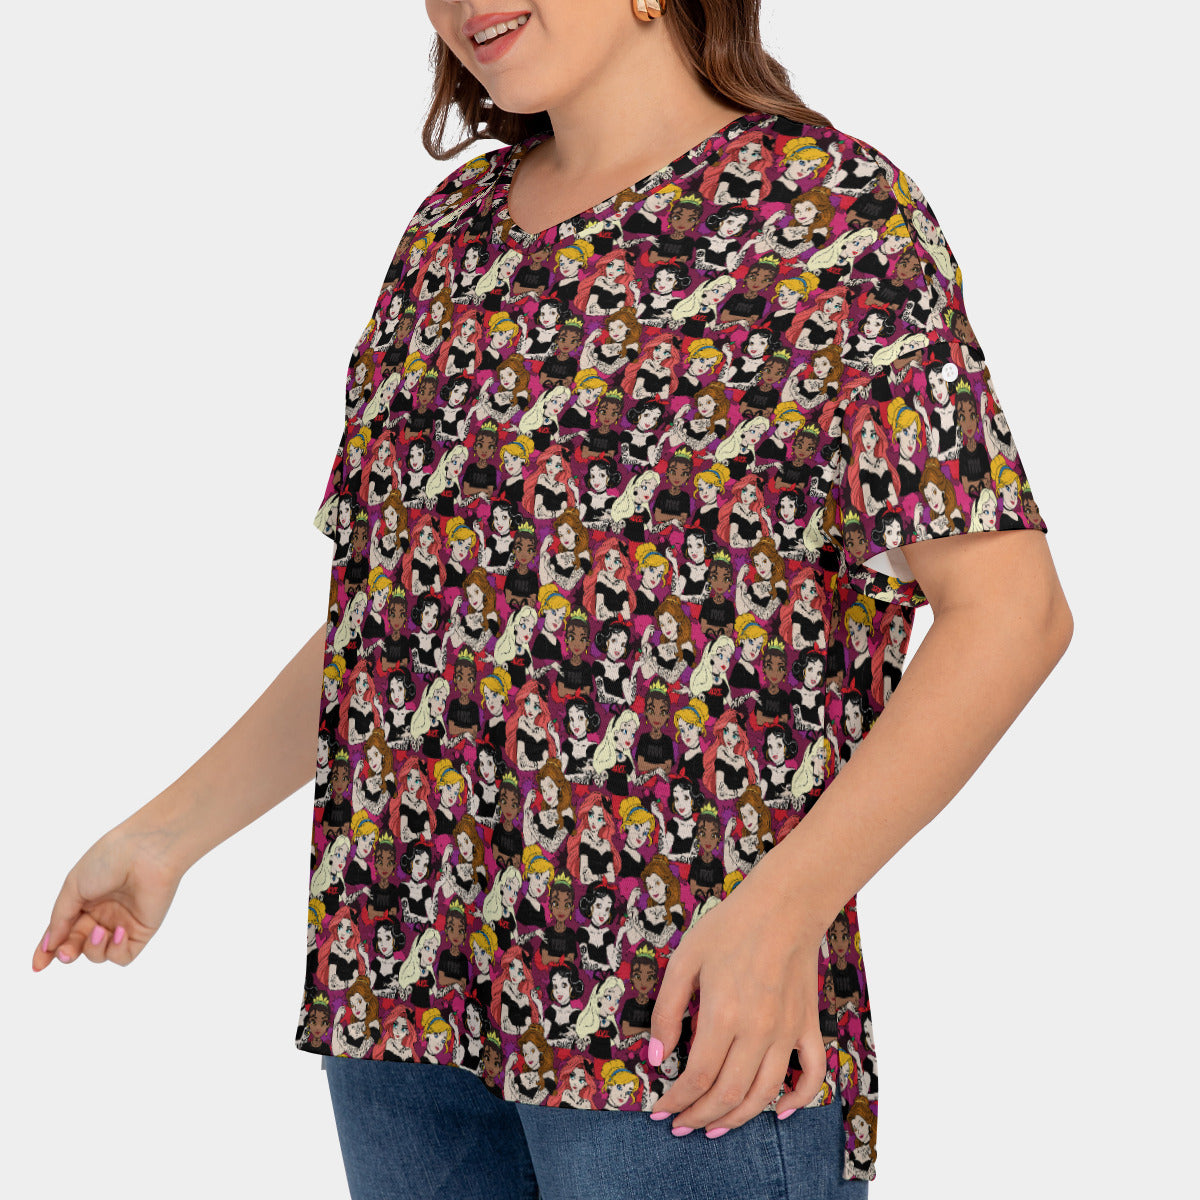 Bad Girls Women's Plus Size Short Sleeve T-shirt With Sleeve Loops